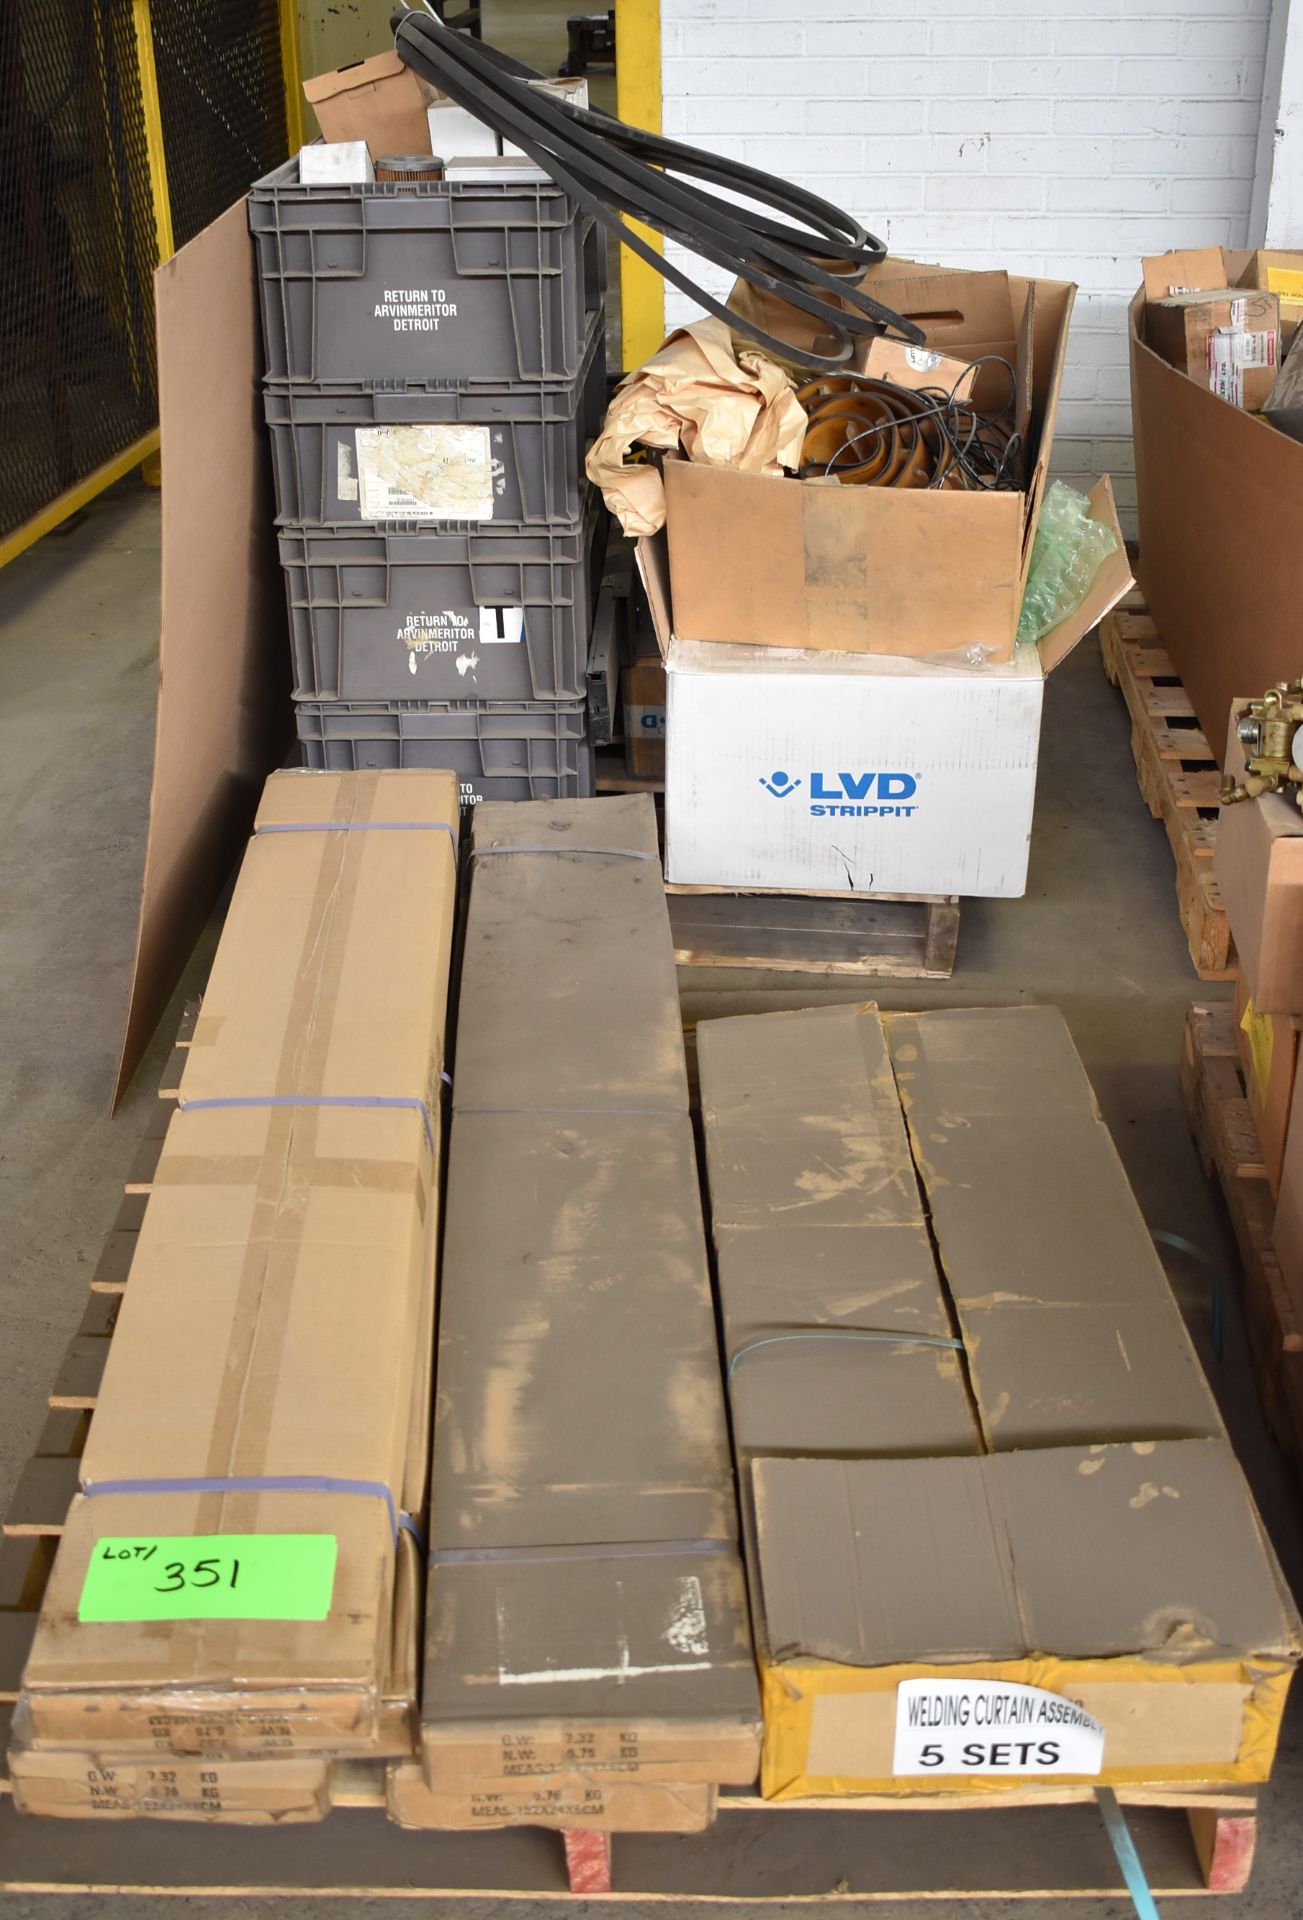 LOT/ SKIDS WITH CONTENTS - SHOP SUPPLIES, SPARE PARTS